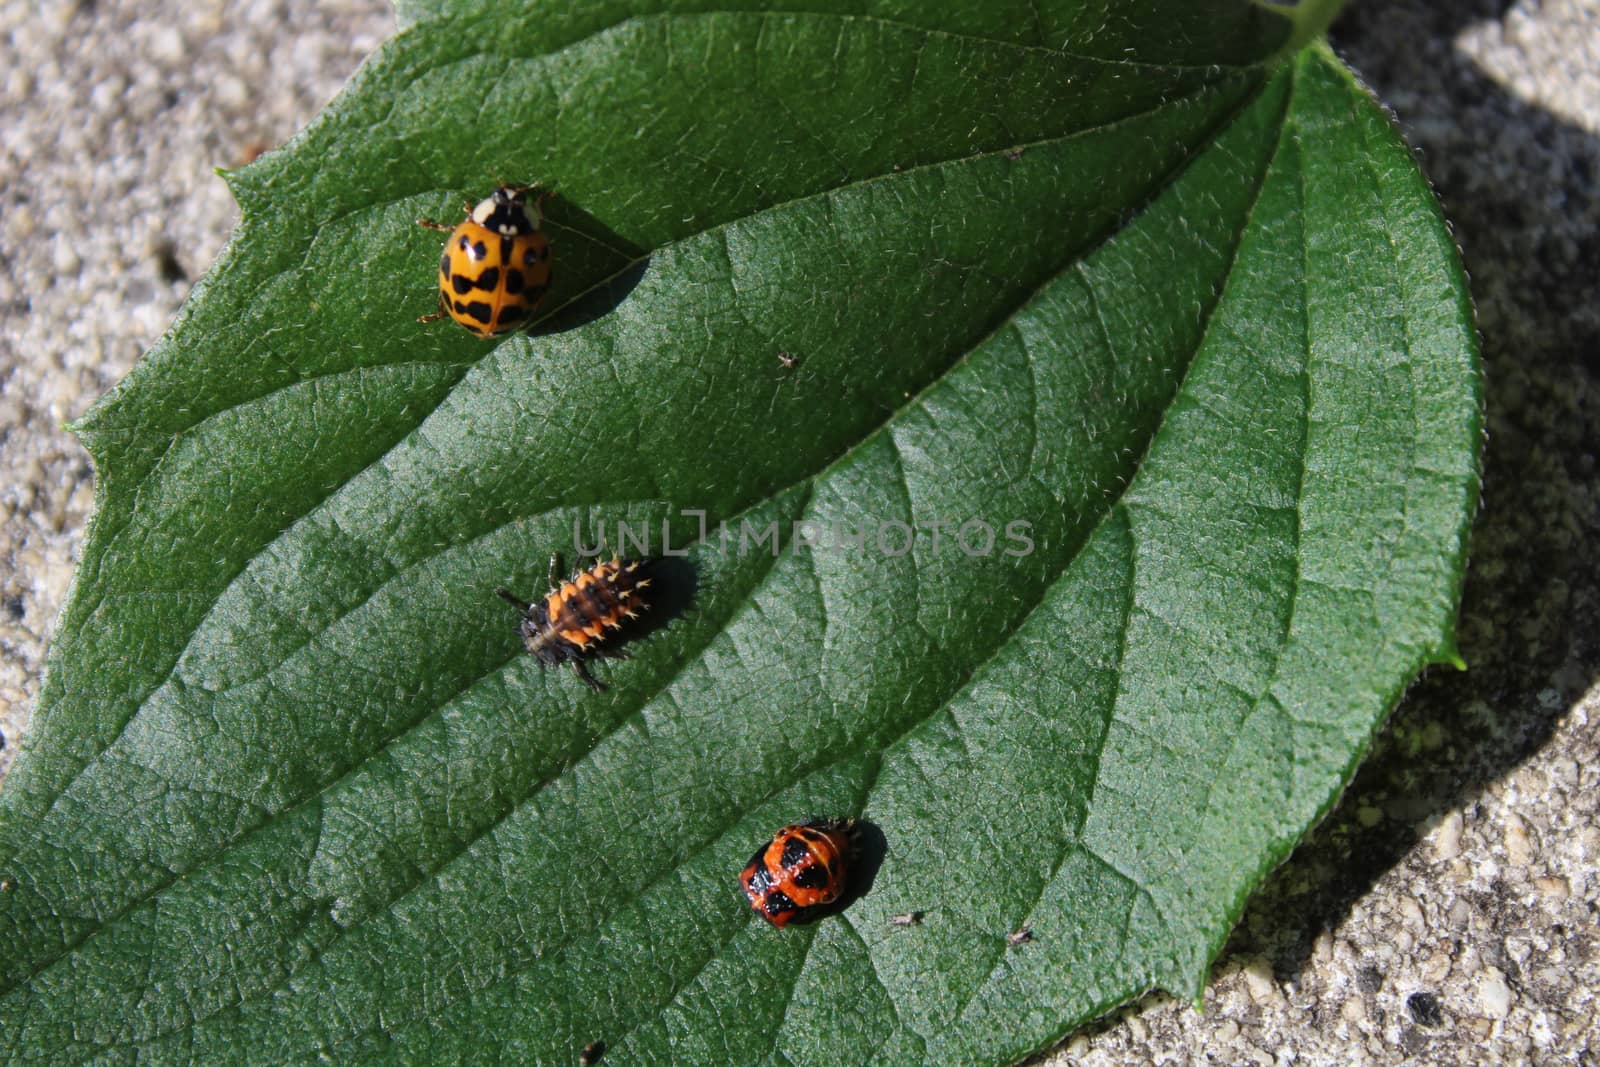 The picture shows a ladybird in tree stages of development on a leaf